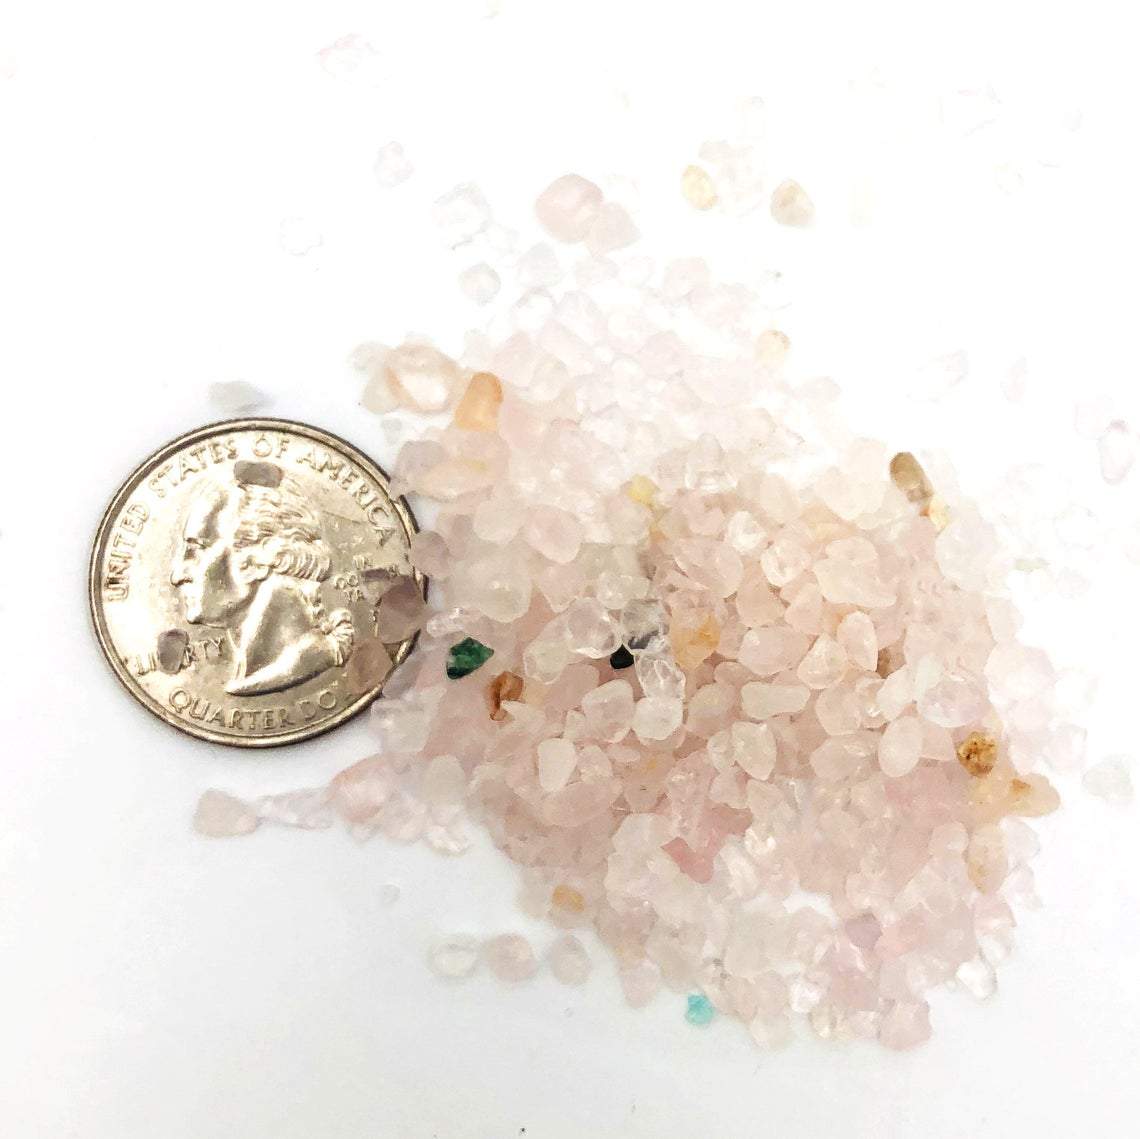 Small pile of Rose Quartz Tiny Chip Stones next to a quarter for size reference